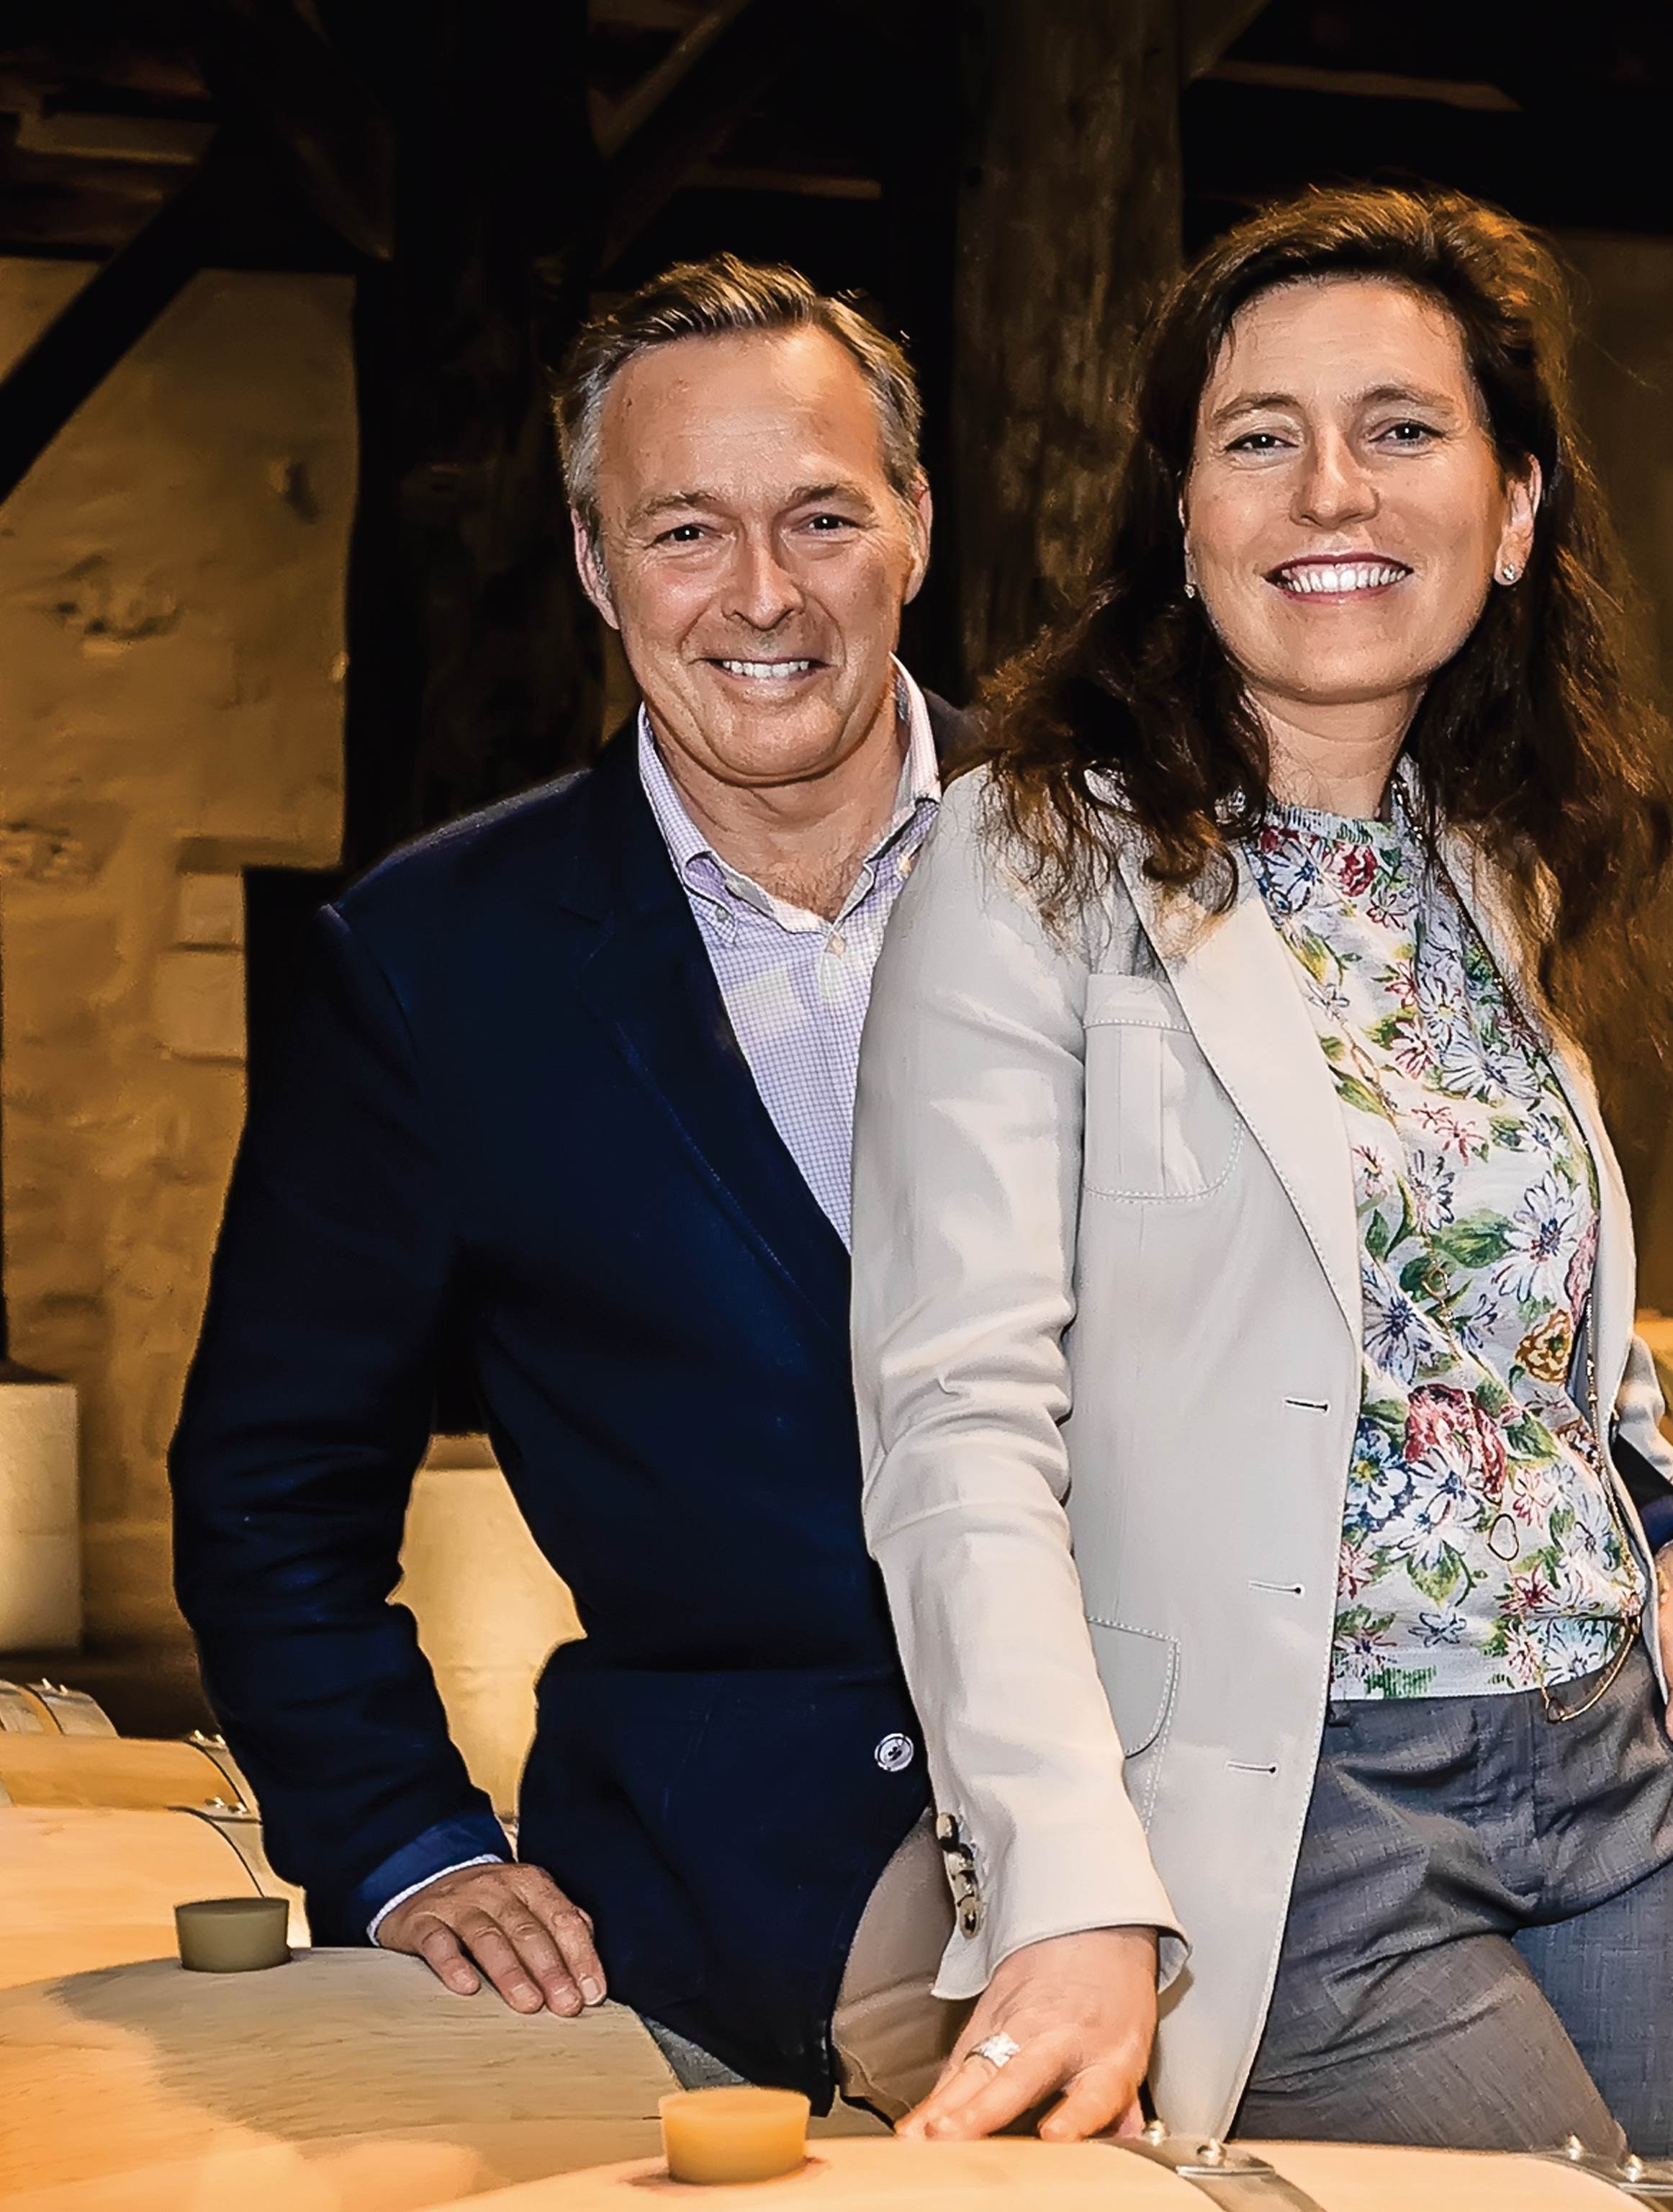 in the newly-opened cellar, Karl Friedrich Scheufele, owner of the watch manufacturer Chopard, with his wife Christine: in January 2012 the couple purchased Château Monestier La Tour from the Dutch entrepreneur Philip de Haseth-Möller.